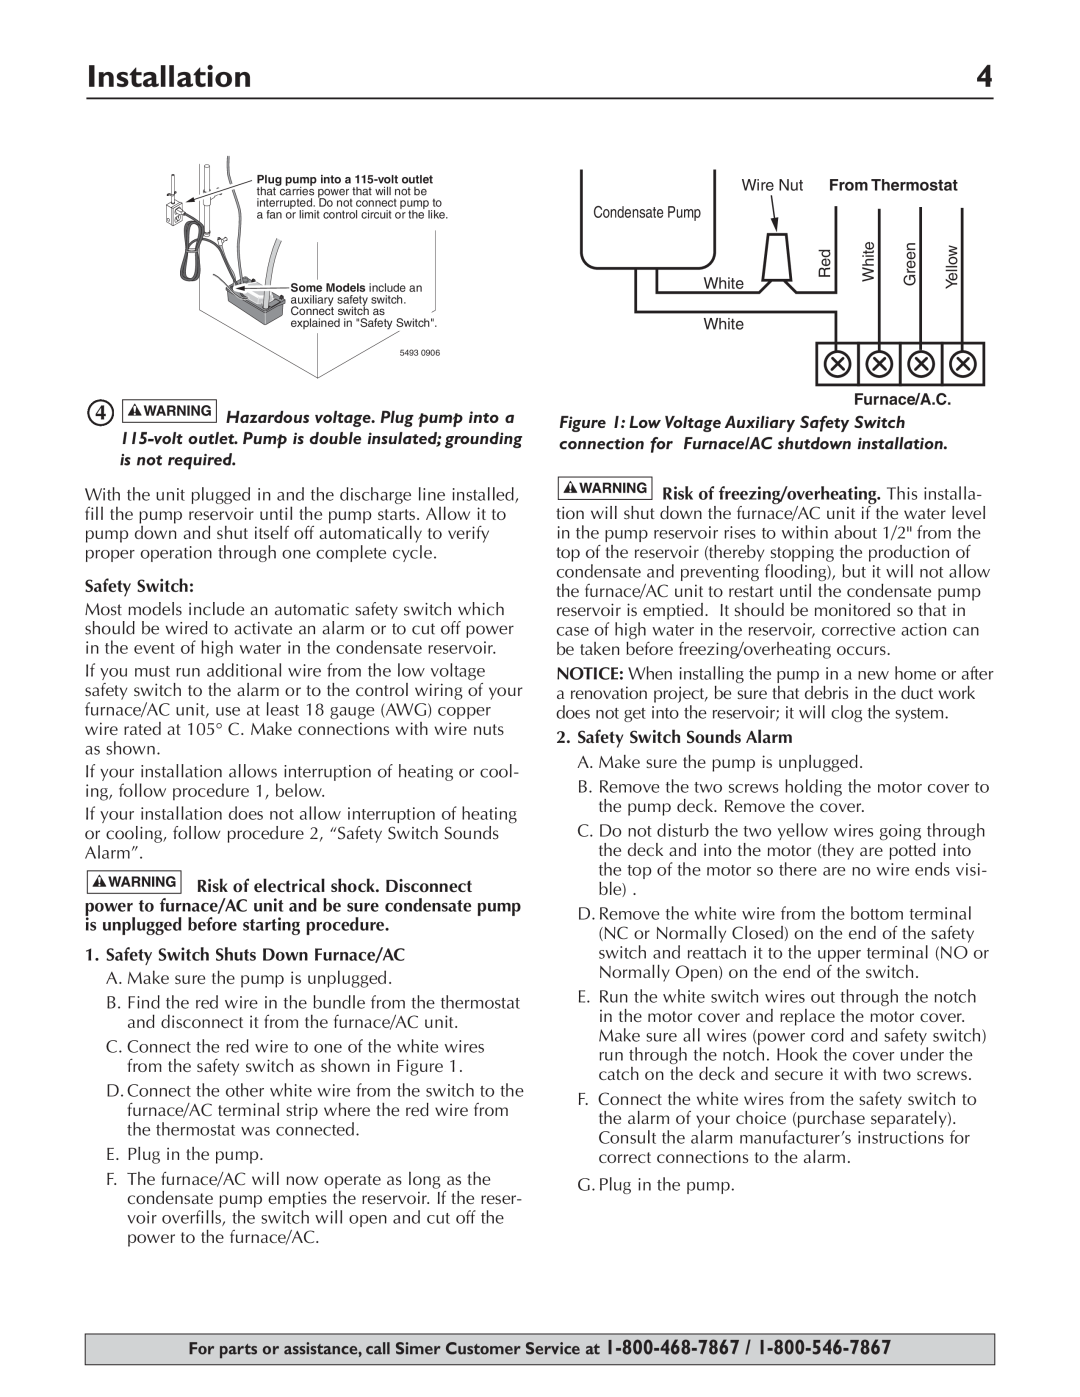 Simer Pumps 2520ULST owner manual Safety Switch Shuts Down Furnace/AC, Safety Switch Sounds Alarm, Installation 